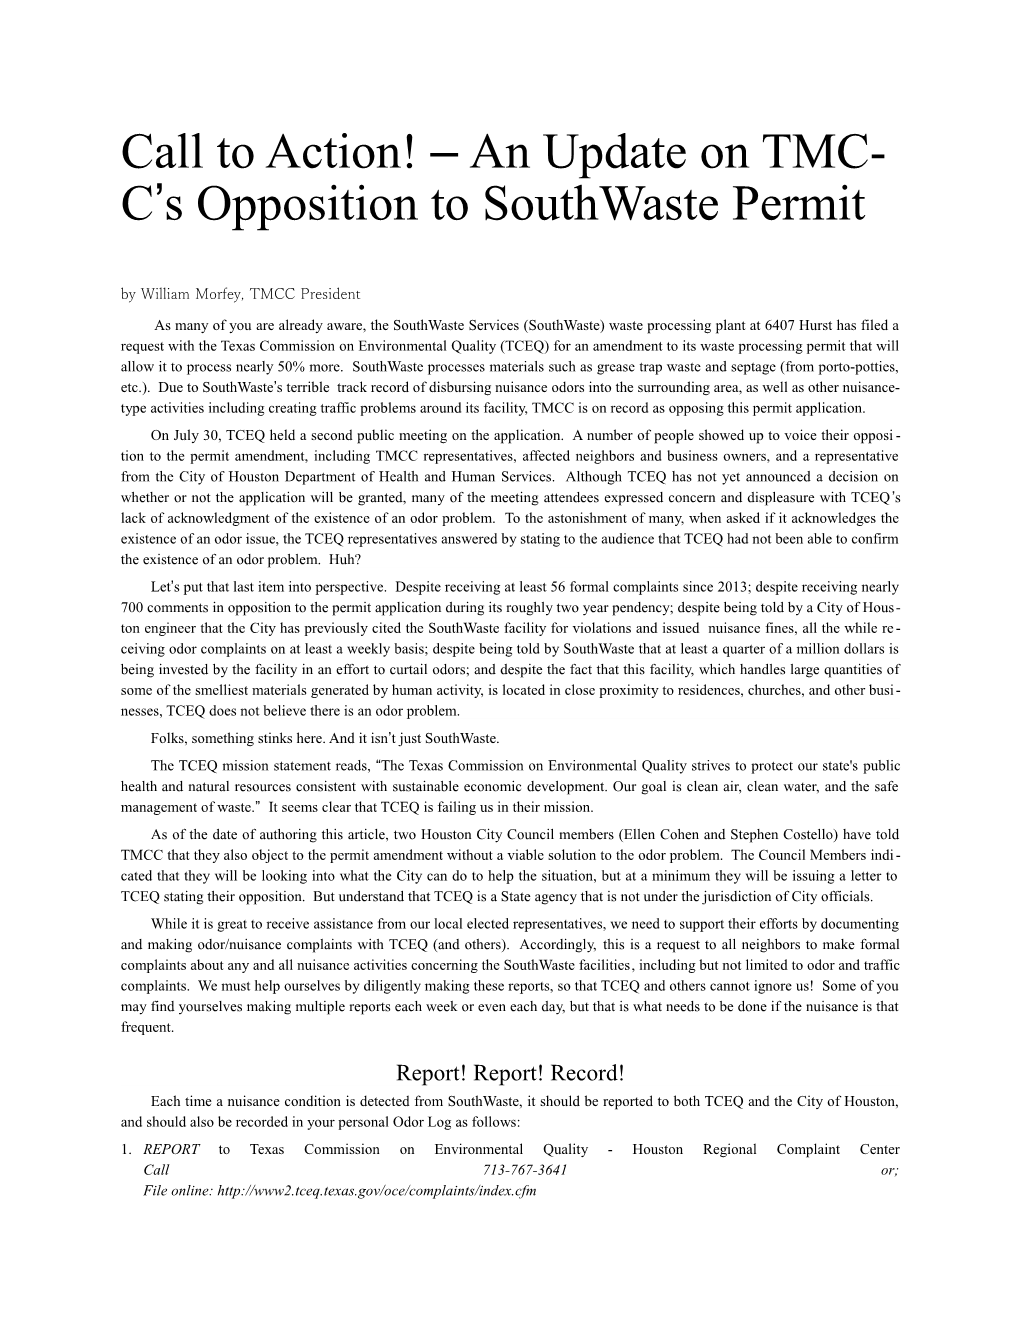 Call to Action! an Update on TMCC S Opposition to Southwaste Permit